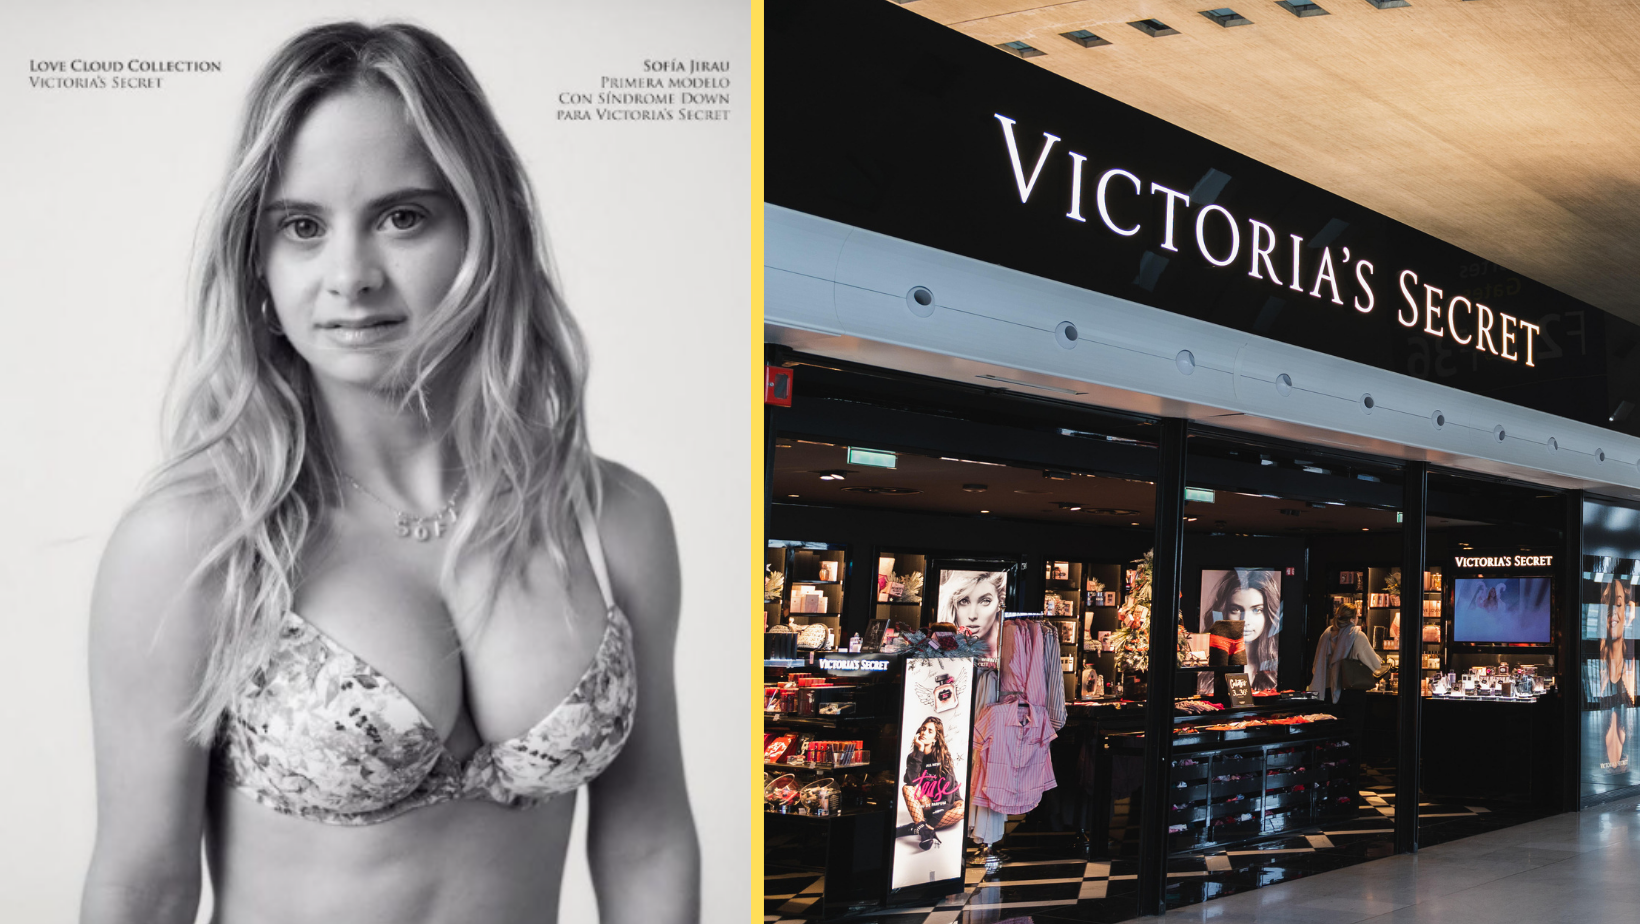 Model Becomes First Face of Victoria's Secret With Down Syndrome